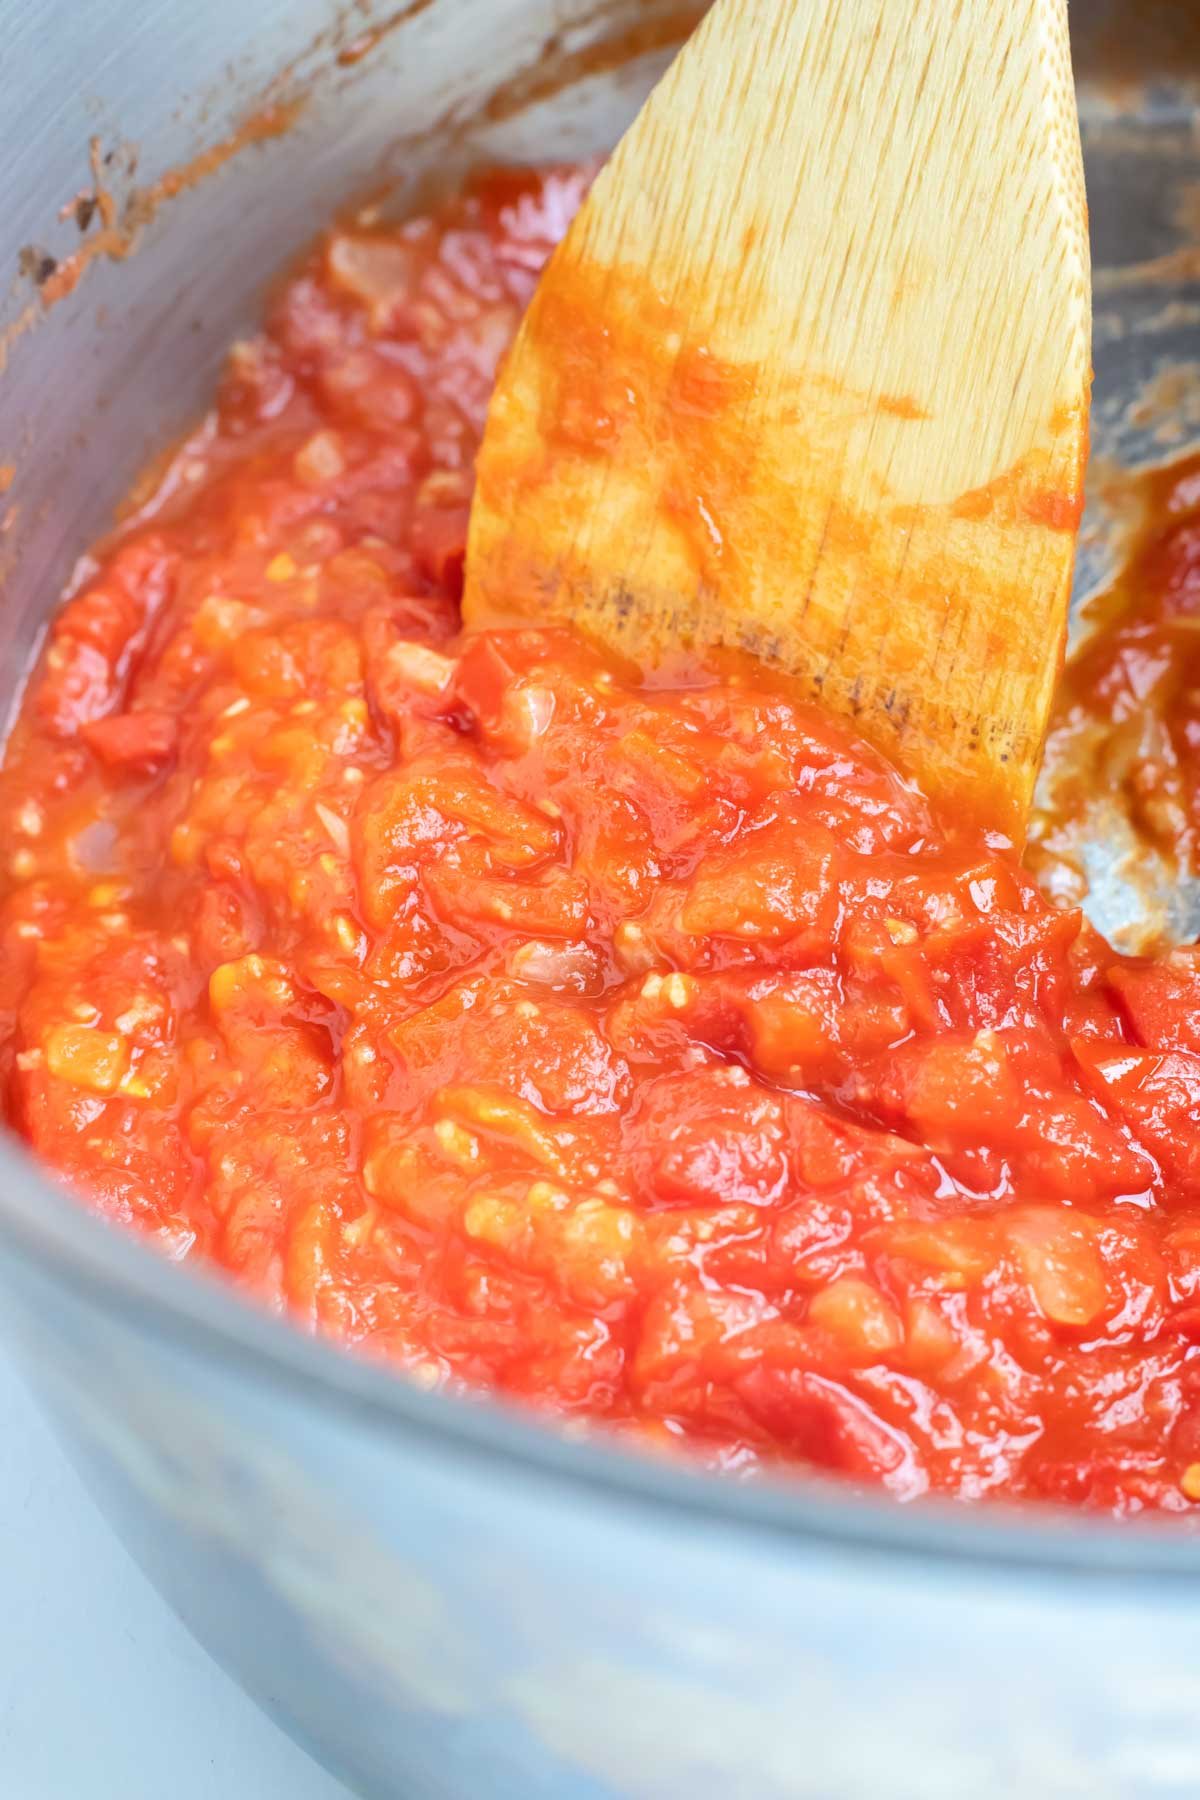 The tomatoes are simmered and crushed.